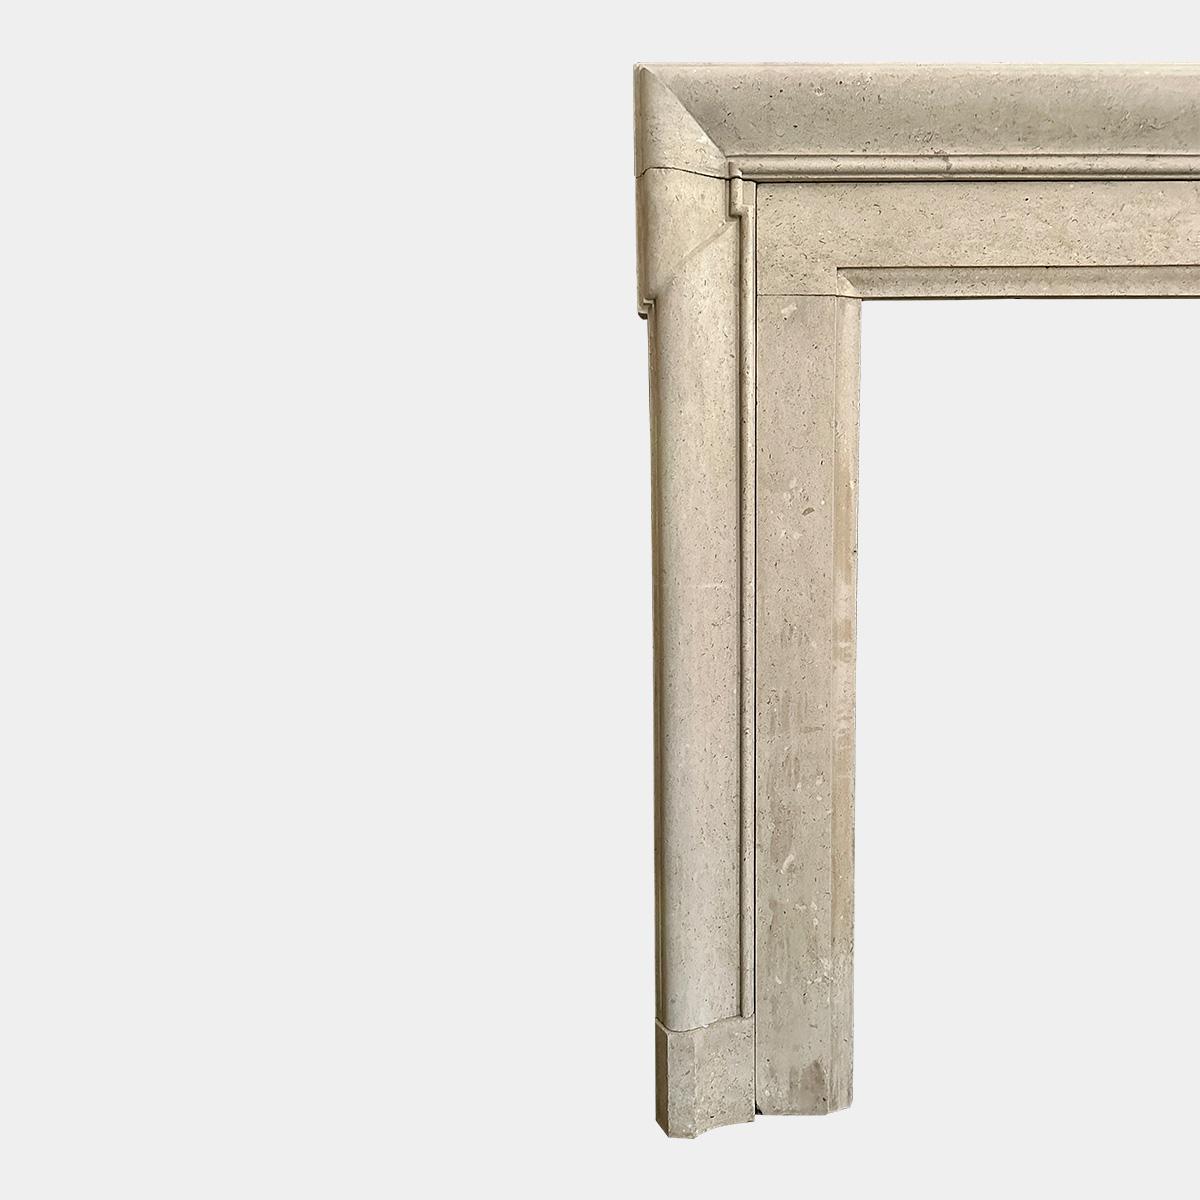 Carved An 18th Century Architectural English Stone Bolection Fireplace Mantel  For Sale